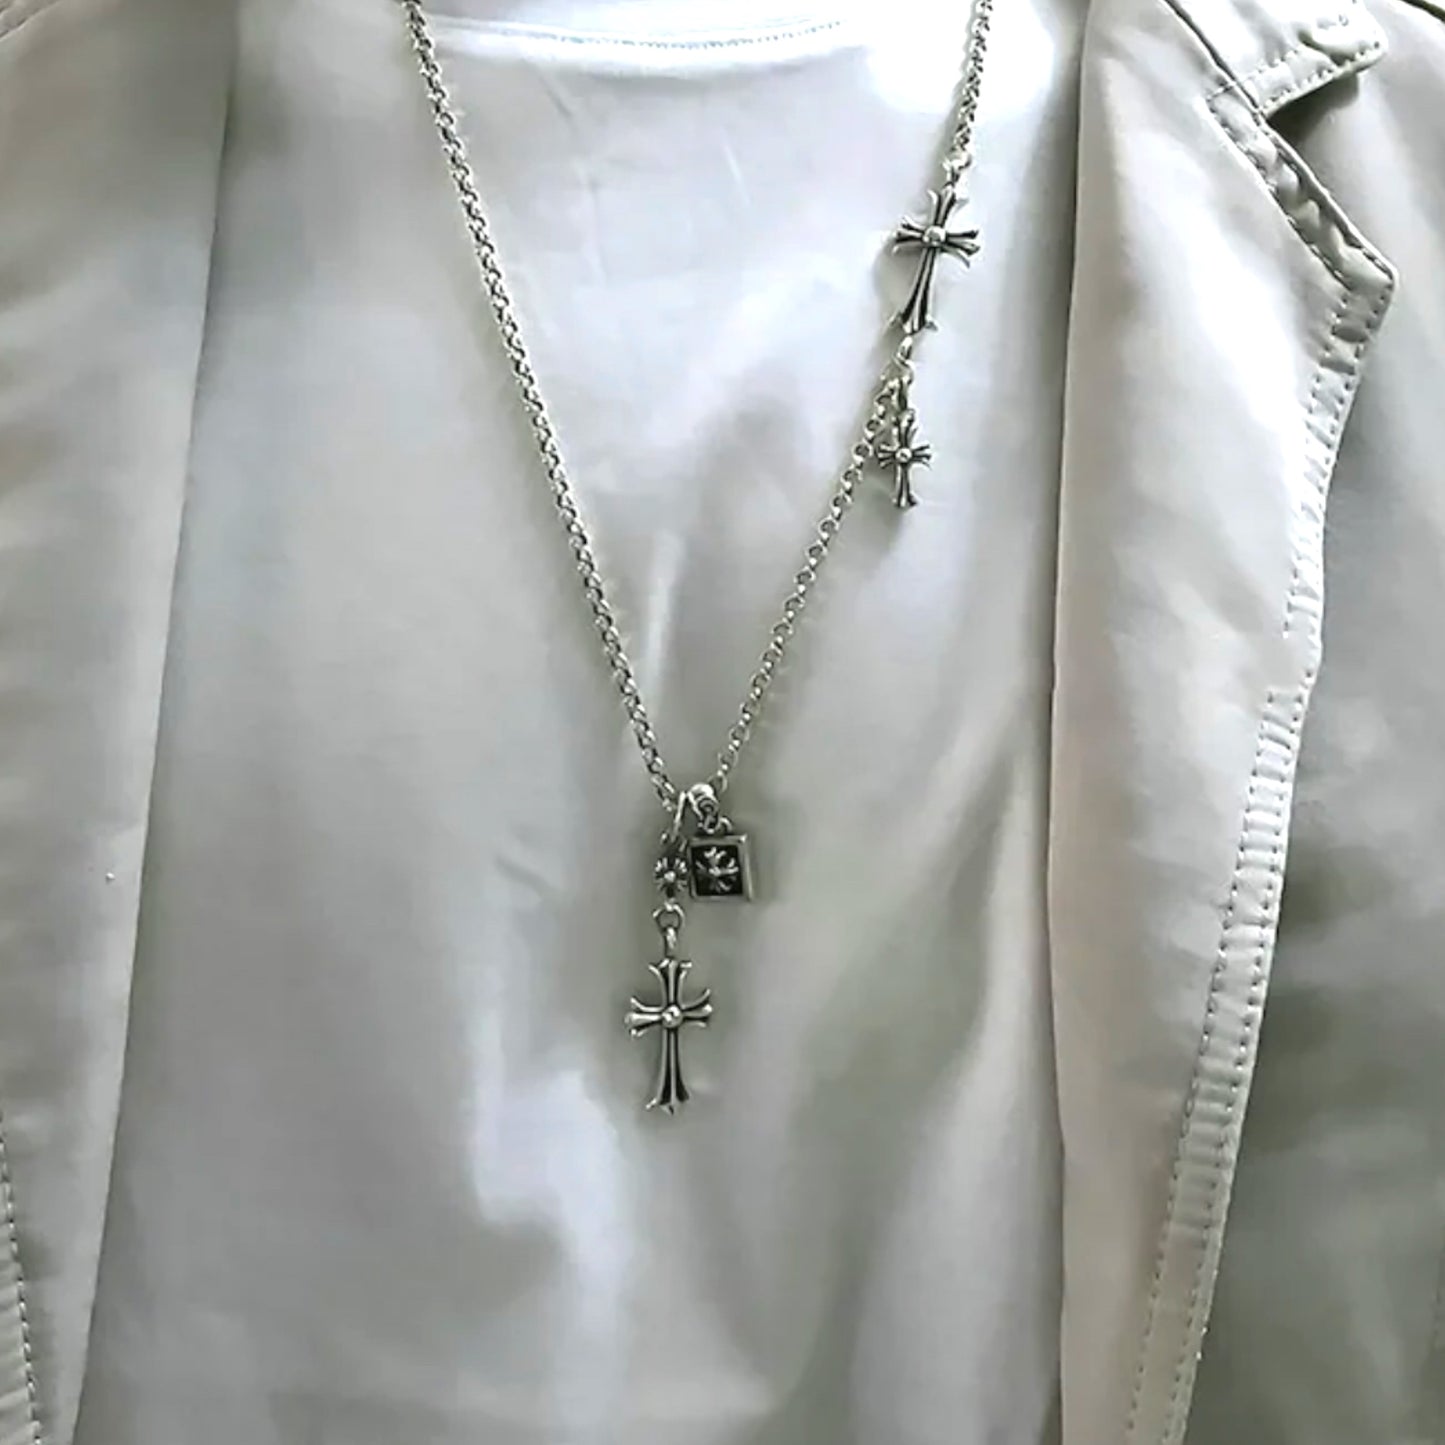 Brand New Chrome Hearts Inspired Cross Necklace